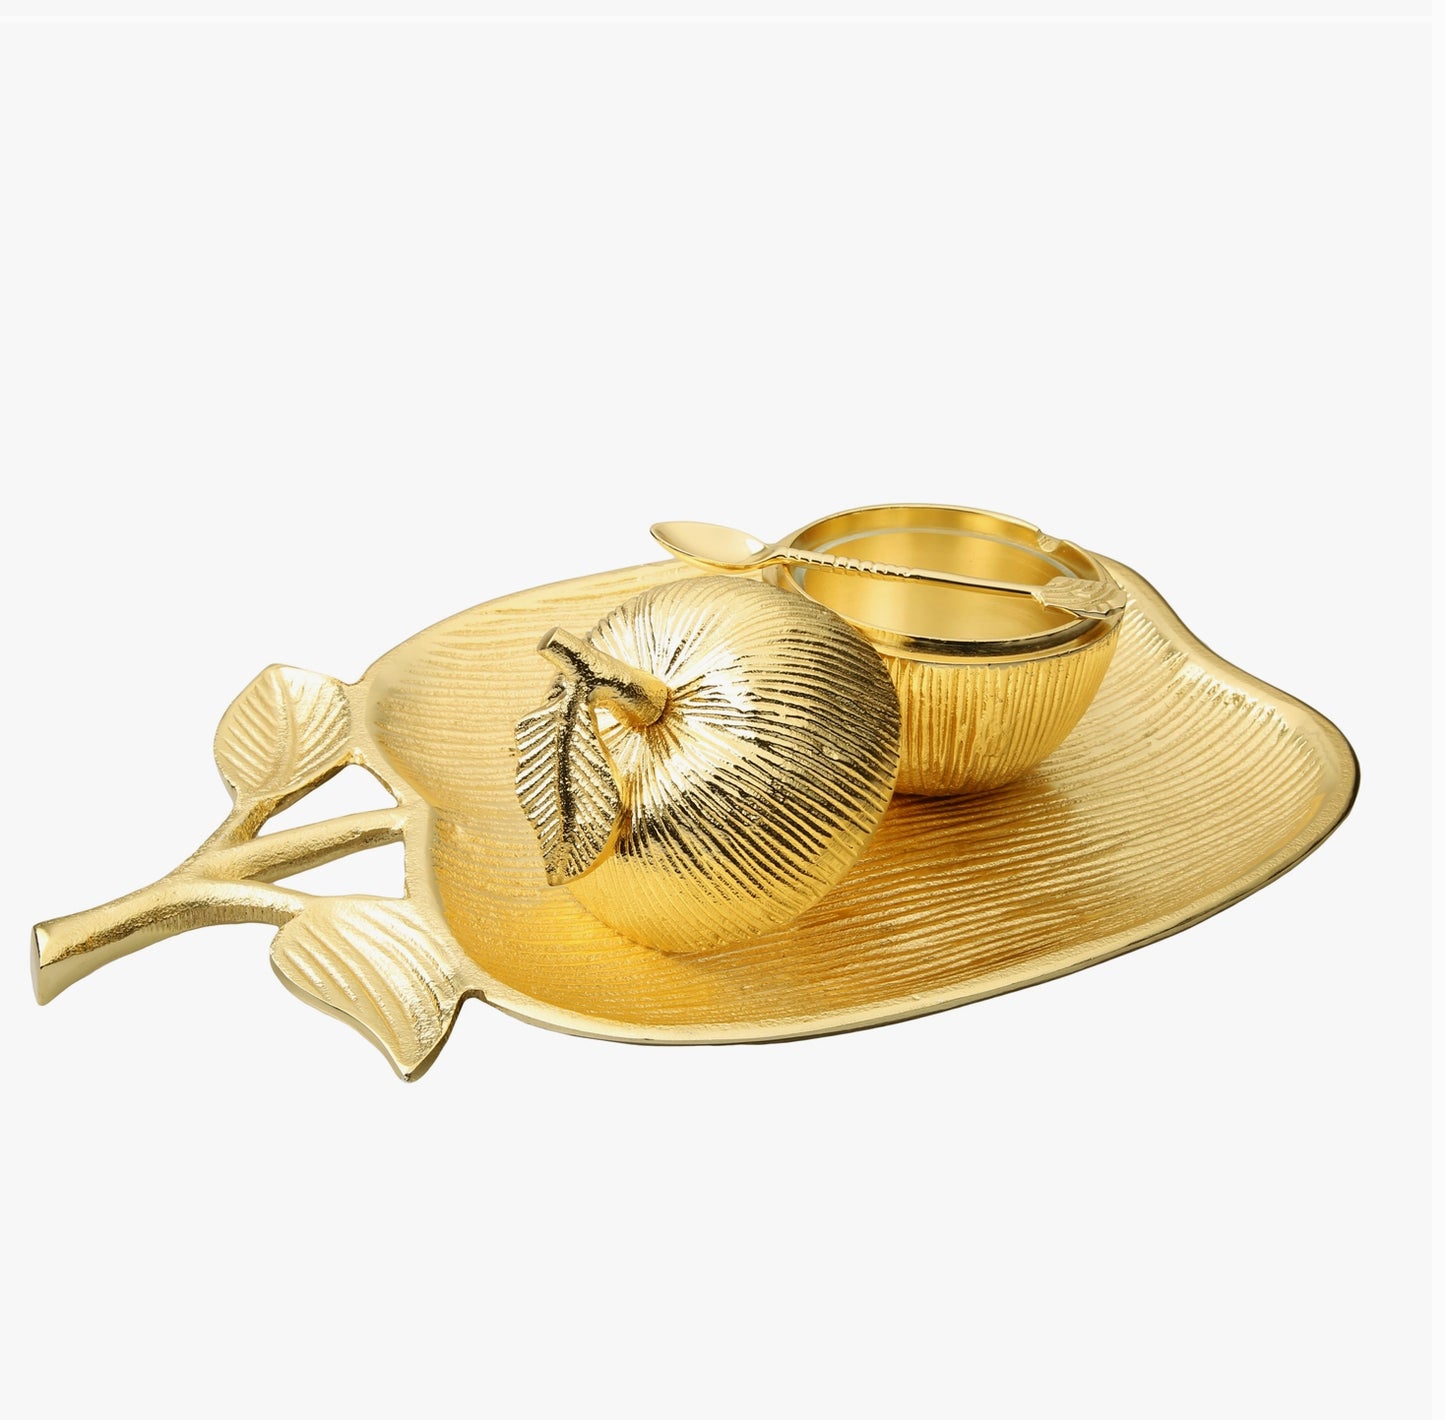 Large Apple Shaped Dish with Removable Honey Jar